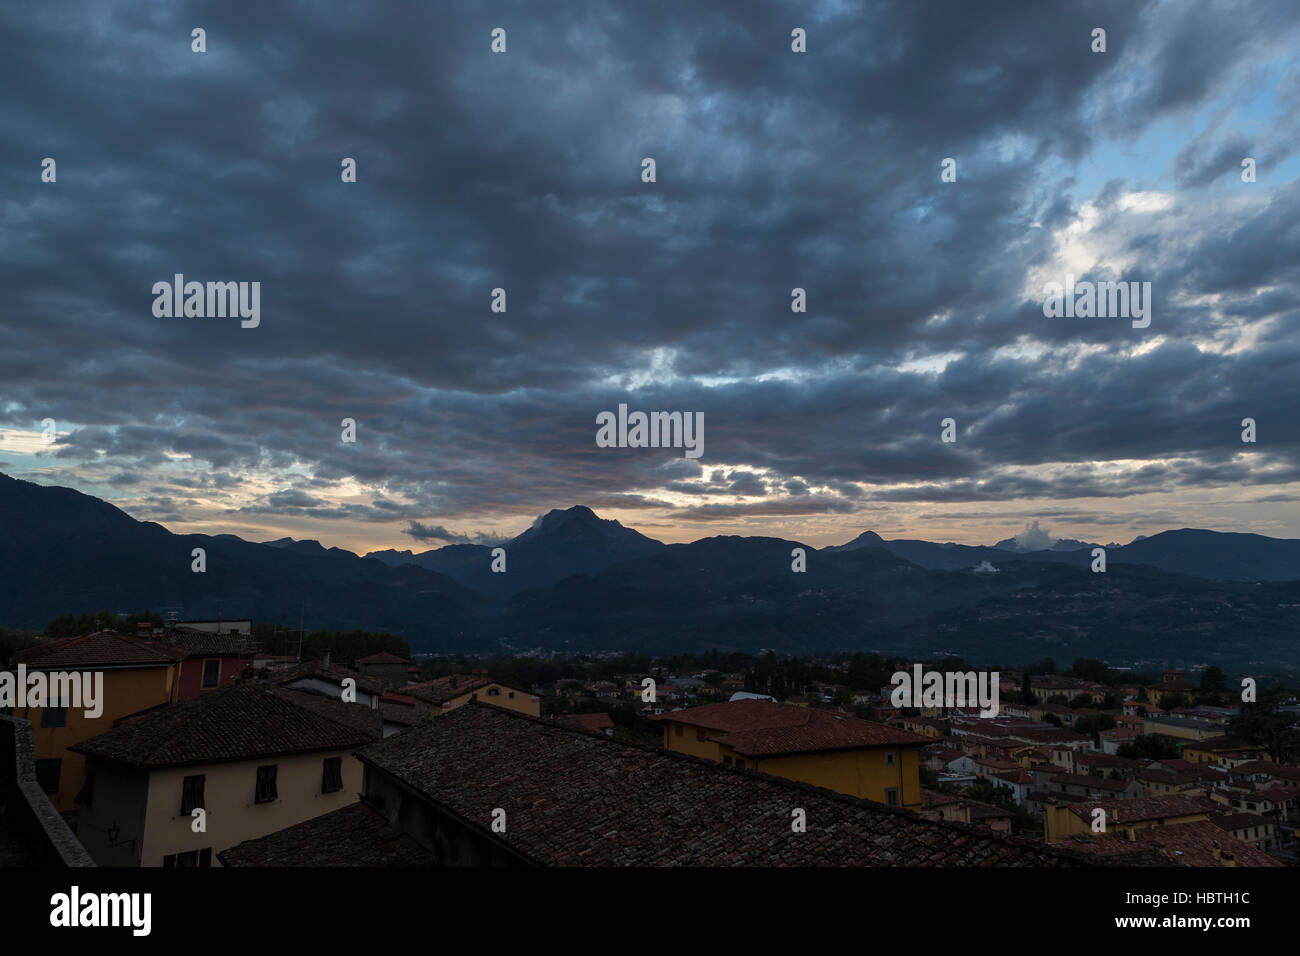 Pania della Croce mountain and the medieval hilltop town of Barga from the terrace of Collegiate Church of San Cristoforo, Barga in Tuscany, Italy. Stock Photo